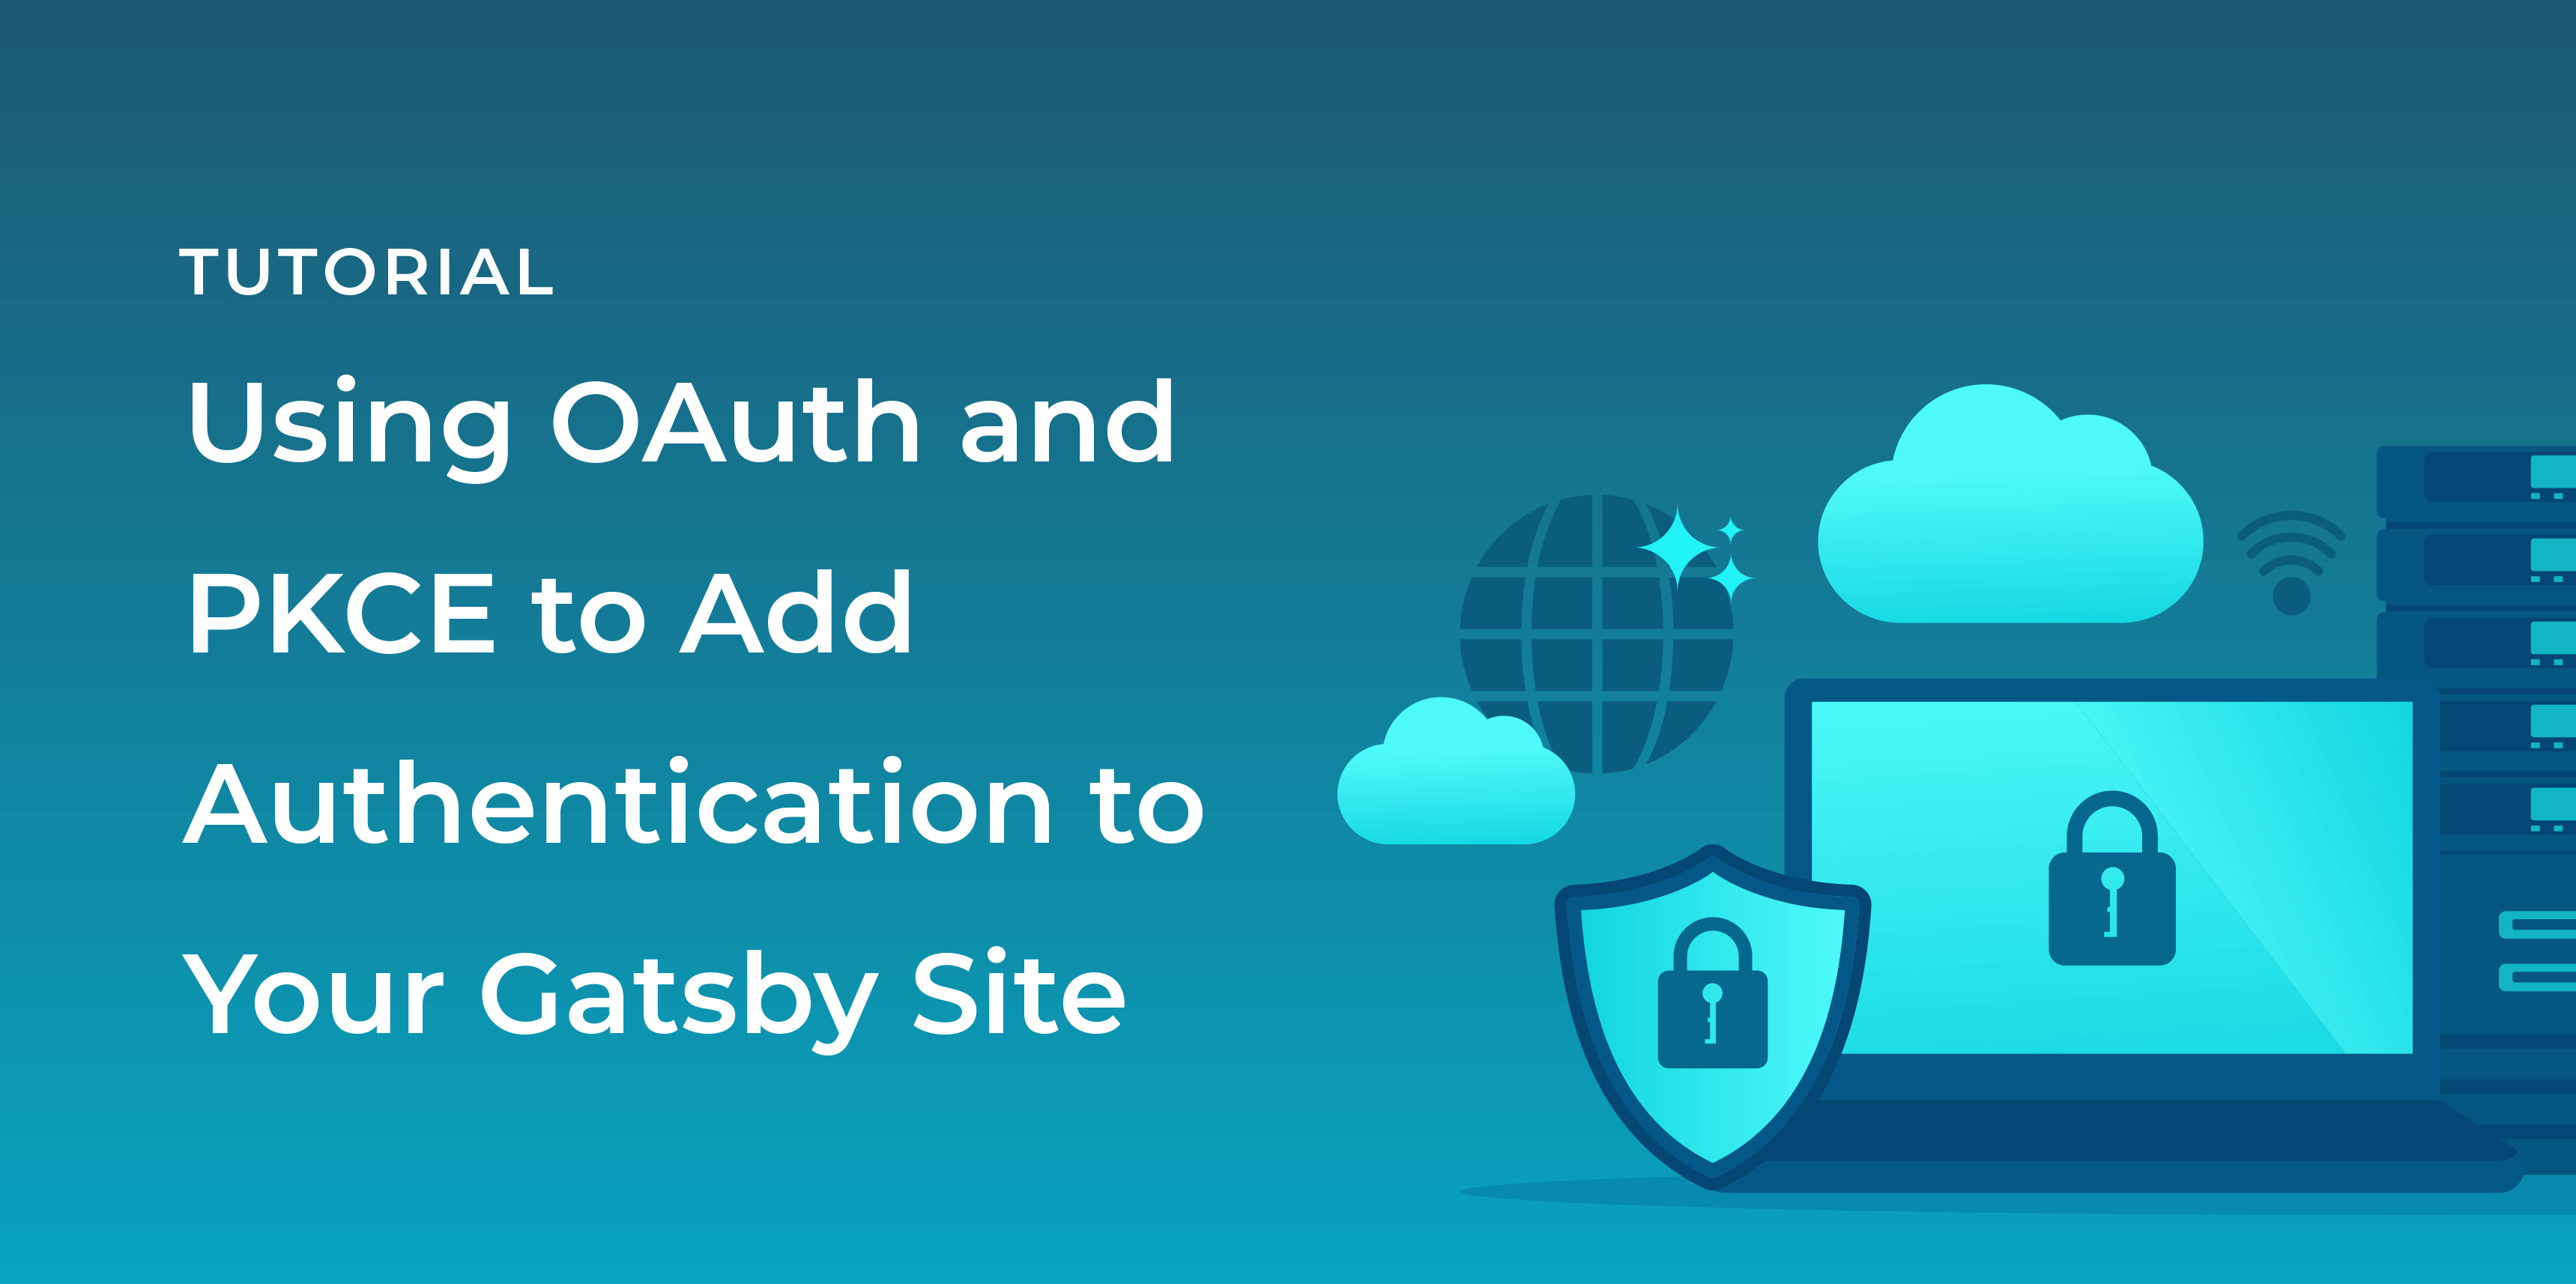 Using OAuth and PKCE to Add Authentication to Your Gatsby Site